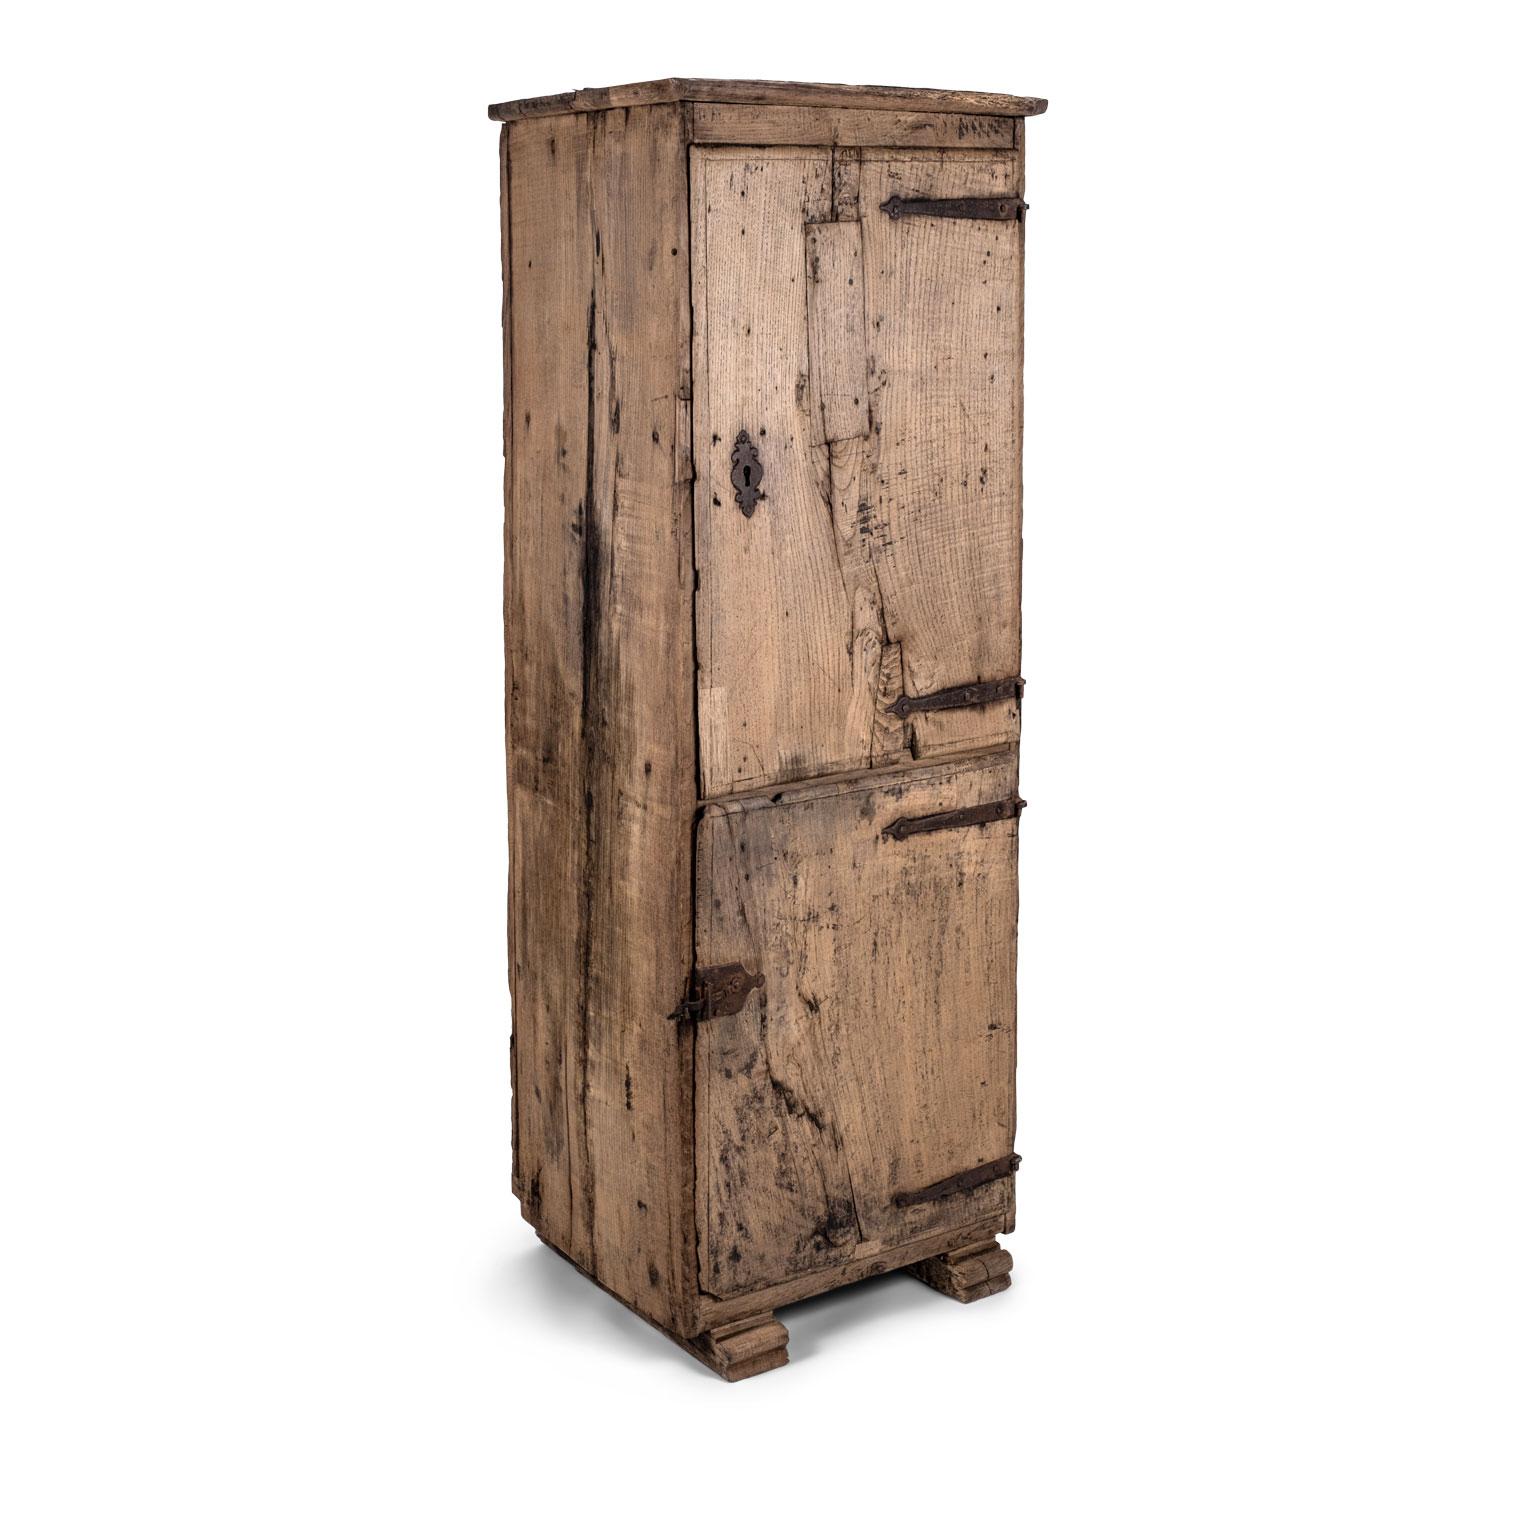 17th century naturally bleached chestnut cupboard from Spain. Simple shape fitting with original iron hinges and latch. Lock old but not original.